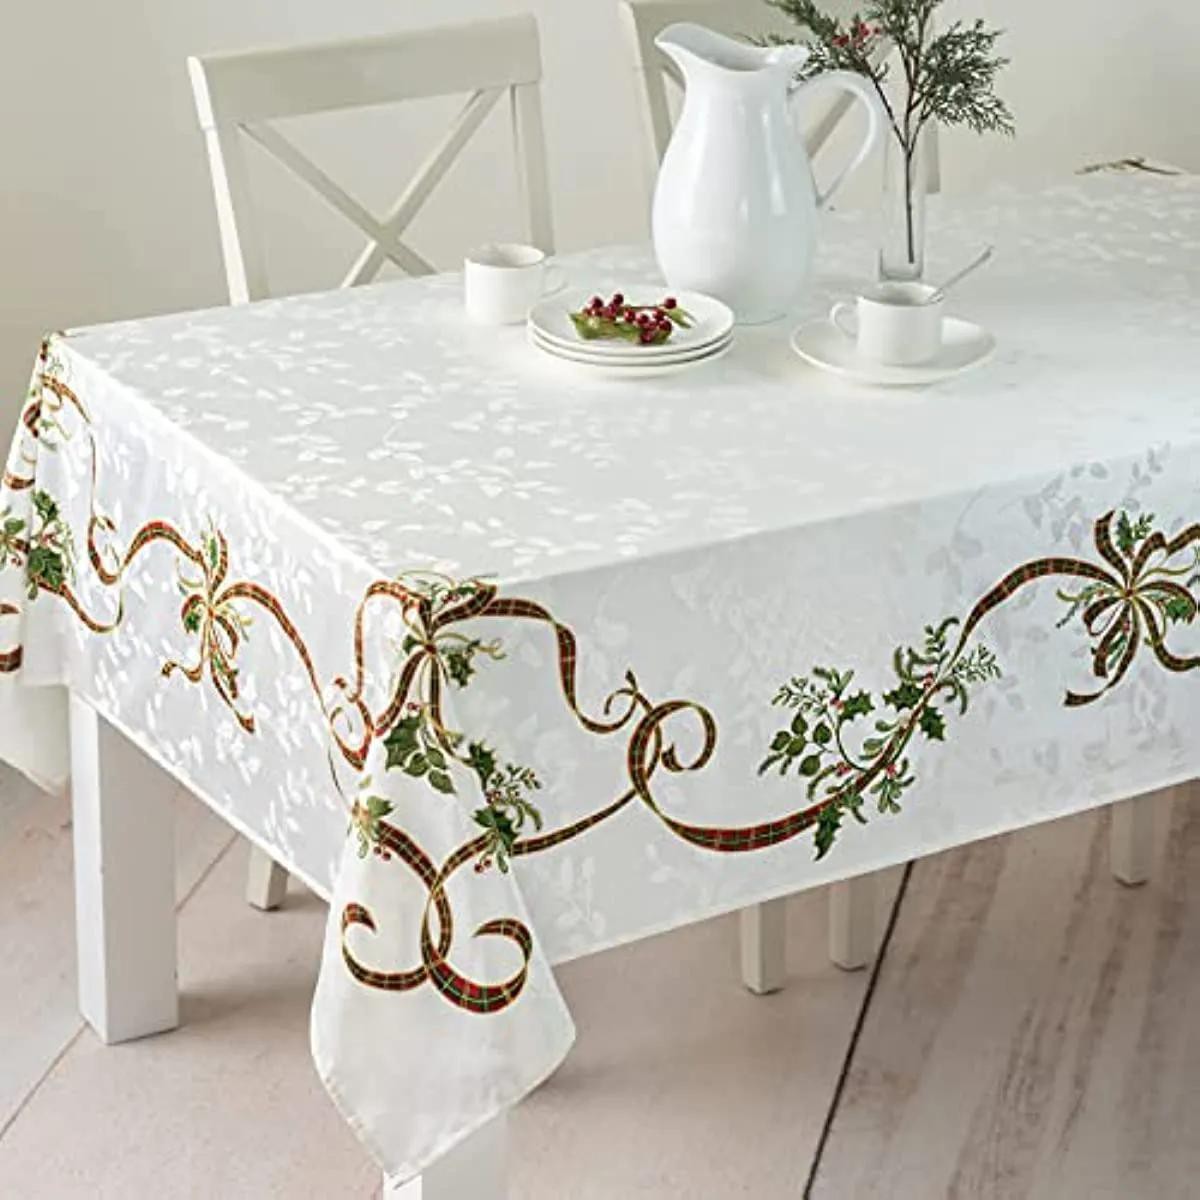 Merry Christmas Waterproof Polyester Printed Rectangular Tablecloth Party Decoration Coffee Table Tablecloth Holiday Table Decor